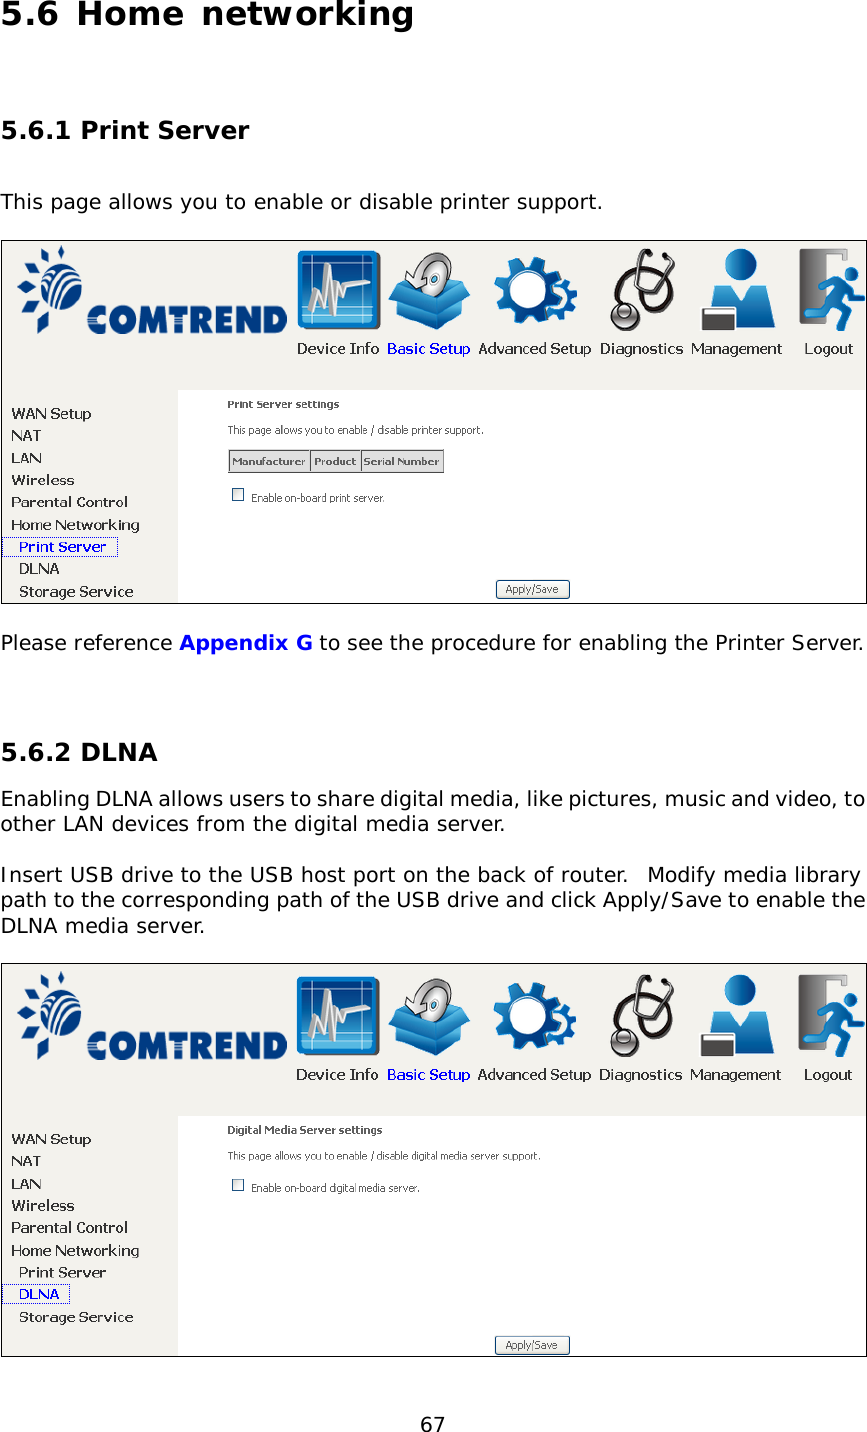  67 5.6 Home networking  5.6.1 Print Server  This page allows you to enable or disable printer support.    Please reference Appendix G to see the procedure for enabling the Printer Server.   5.6.2 DLNA Enabling DLNA allows users to share digital media, like pictures, music and video, to other LAN devices from the digital media server.  Insert USB drive to the USB host port on the back of router.  Modify media library path to the corresponding path of the USB drive and click Apply/Save to enable the DLNA media server.    